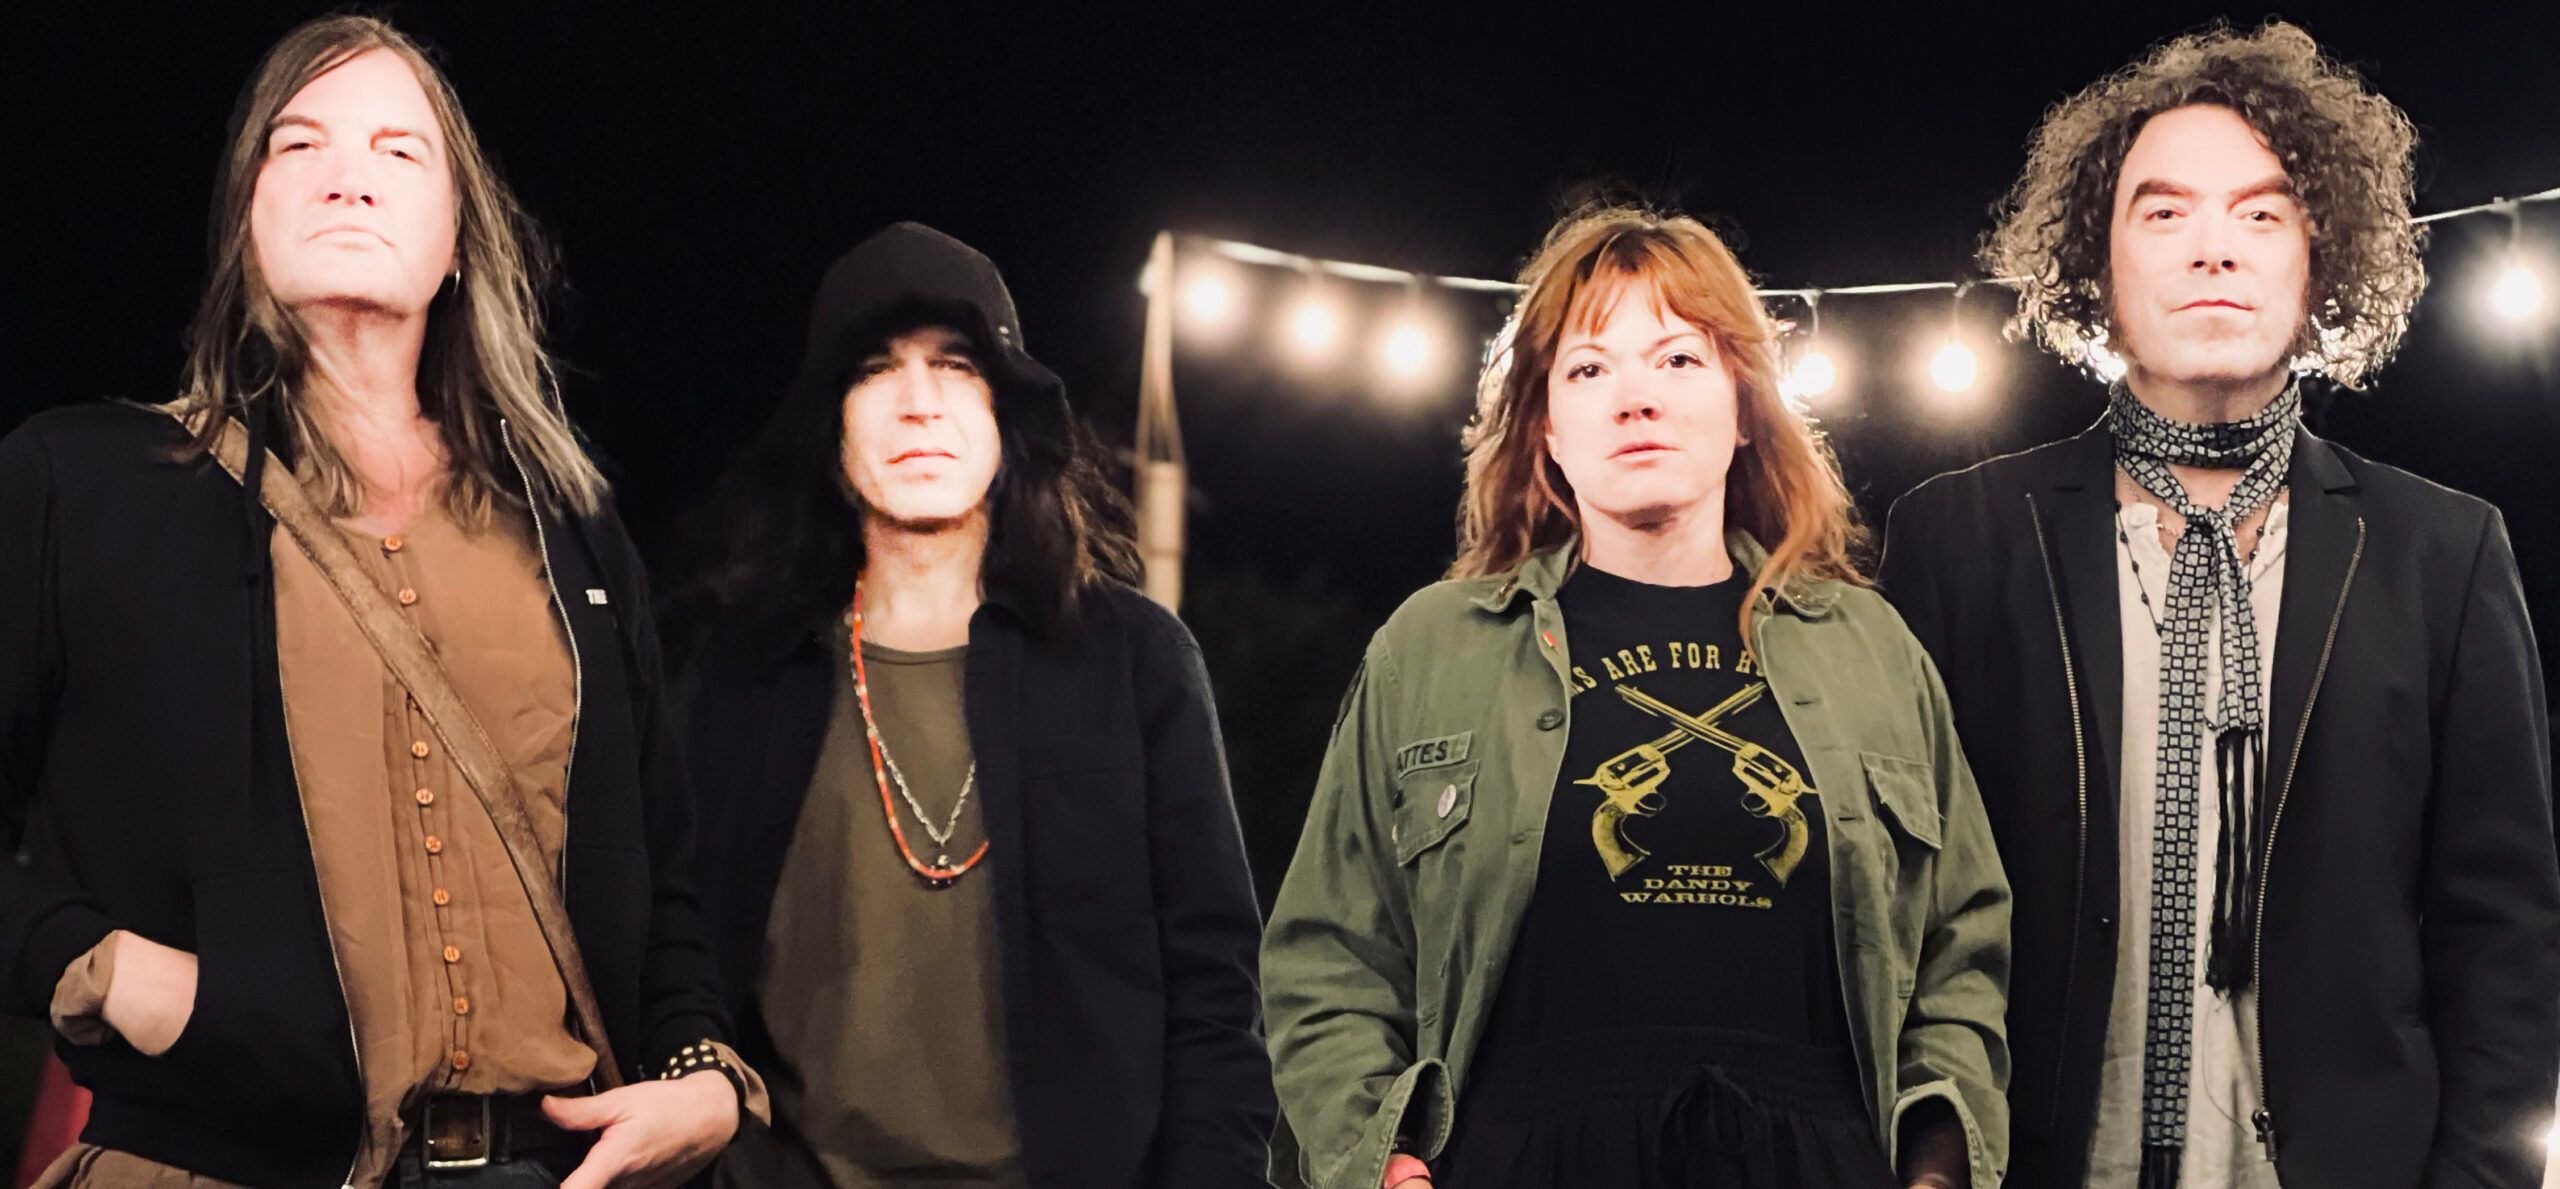 'I'd Like To Help You With Your Problem' mit The Dandy Warhols veröffentlicht